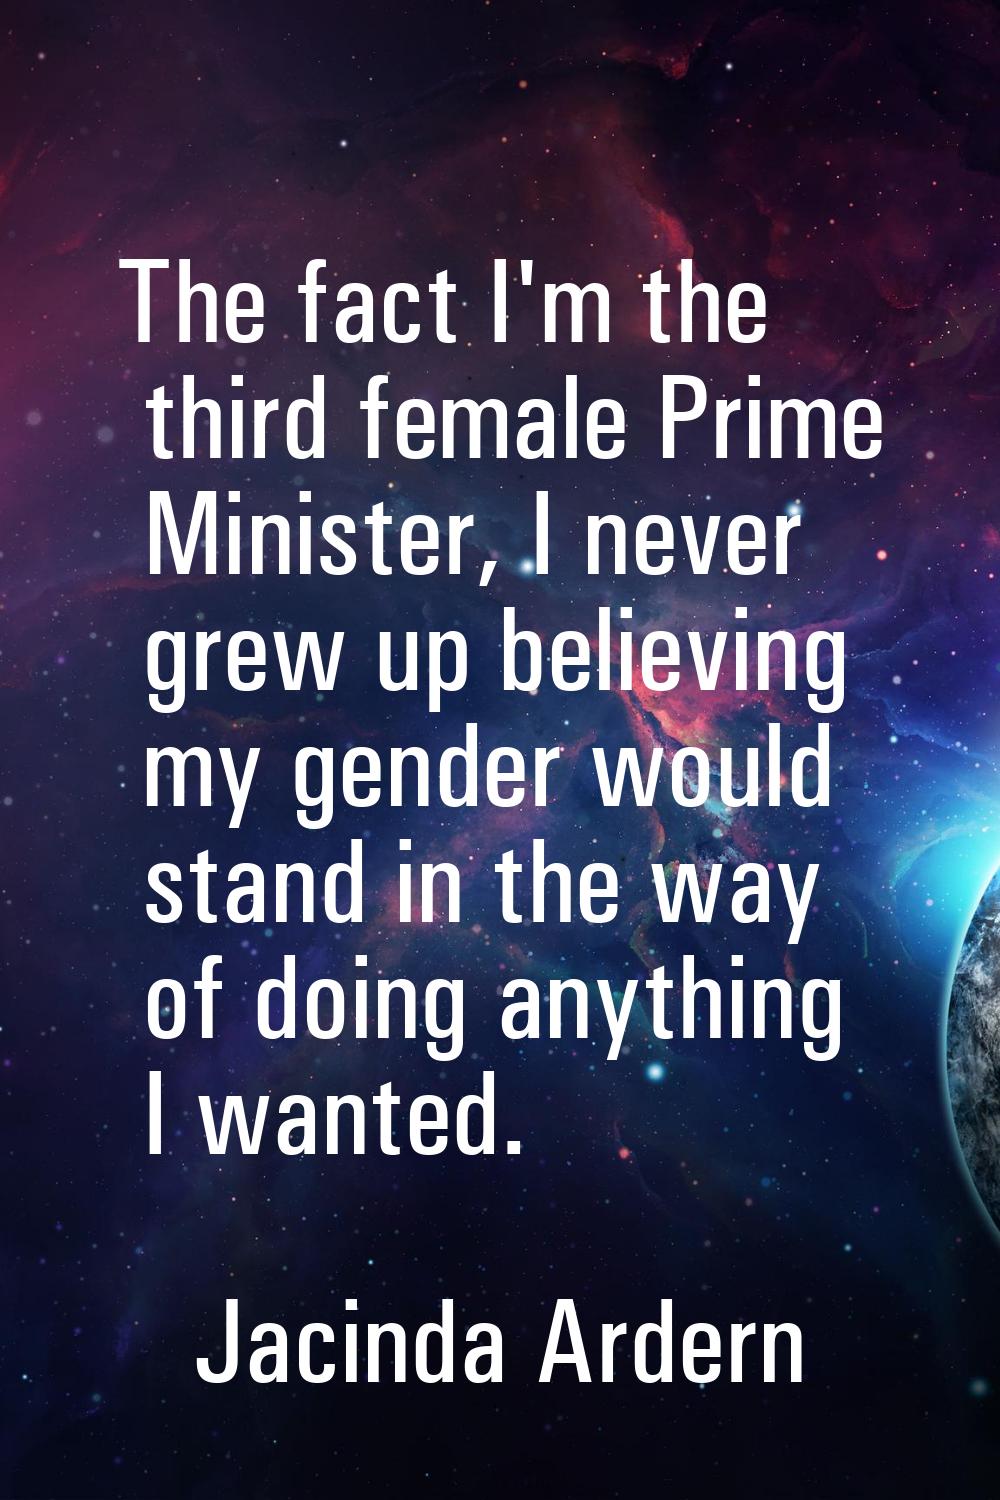 The fact I'm the third female Prime Minister, I never grew up believing my gender would stand in th